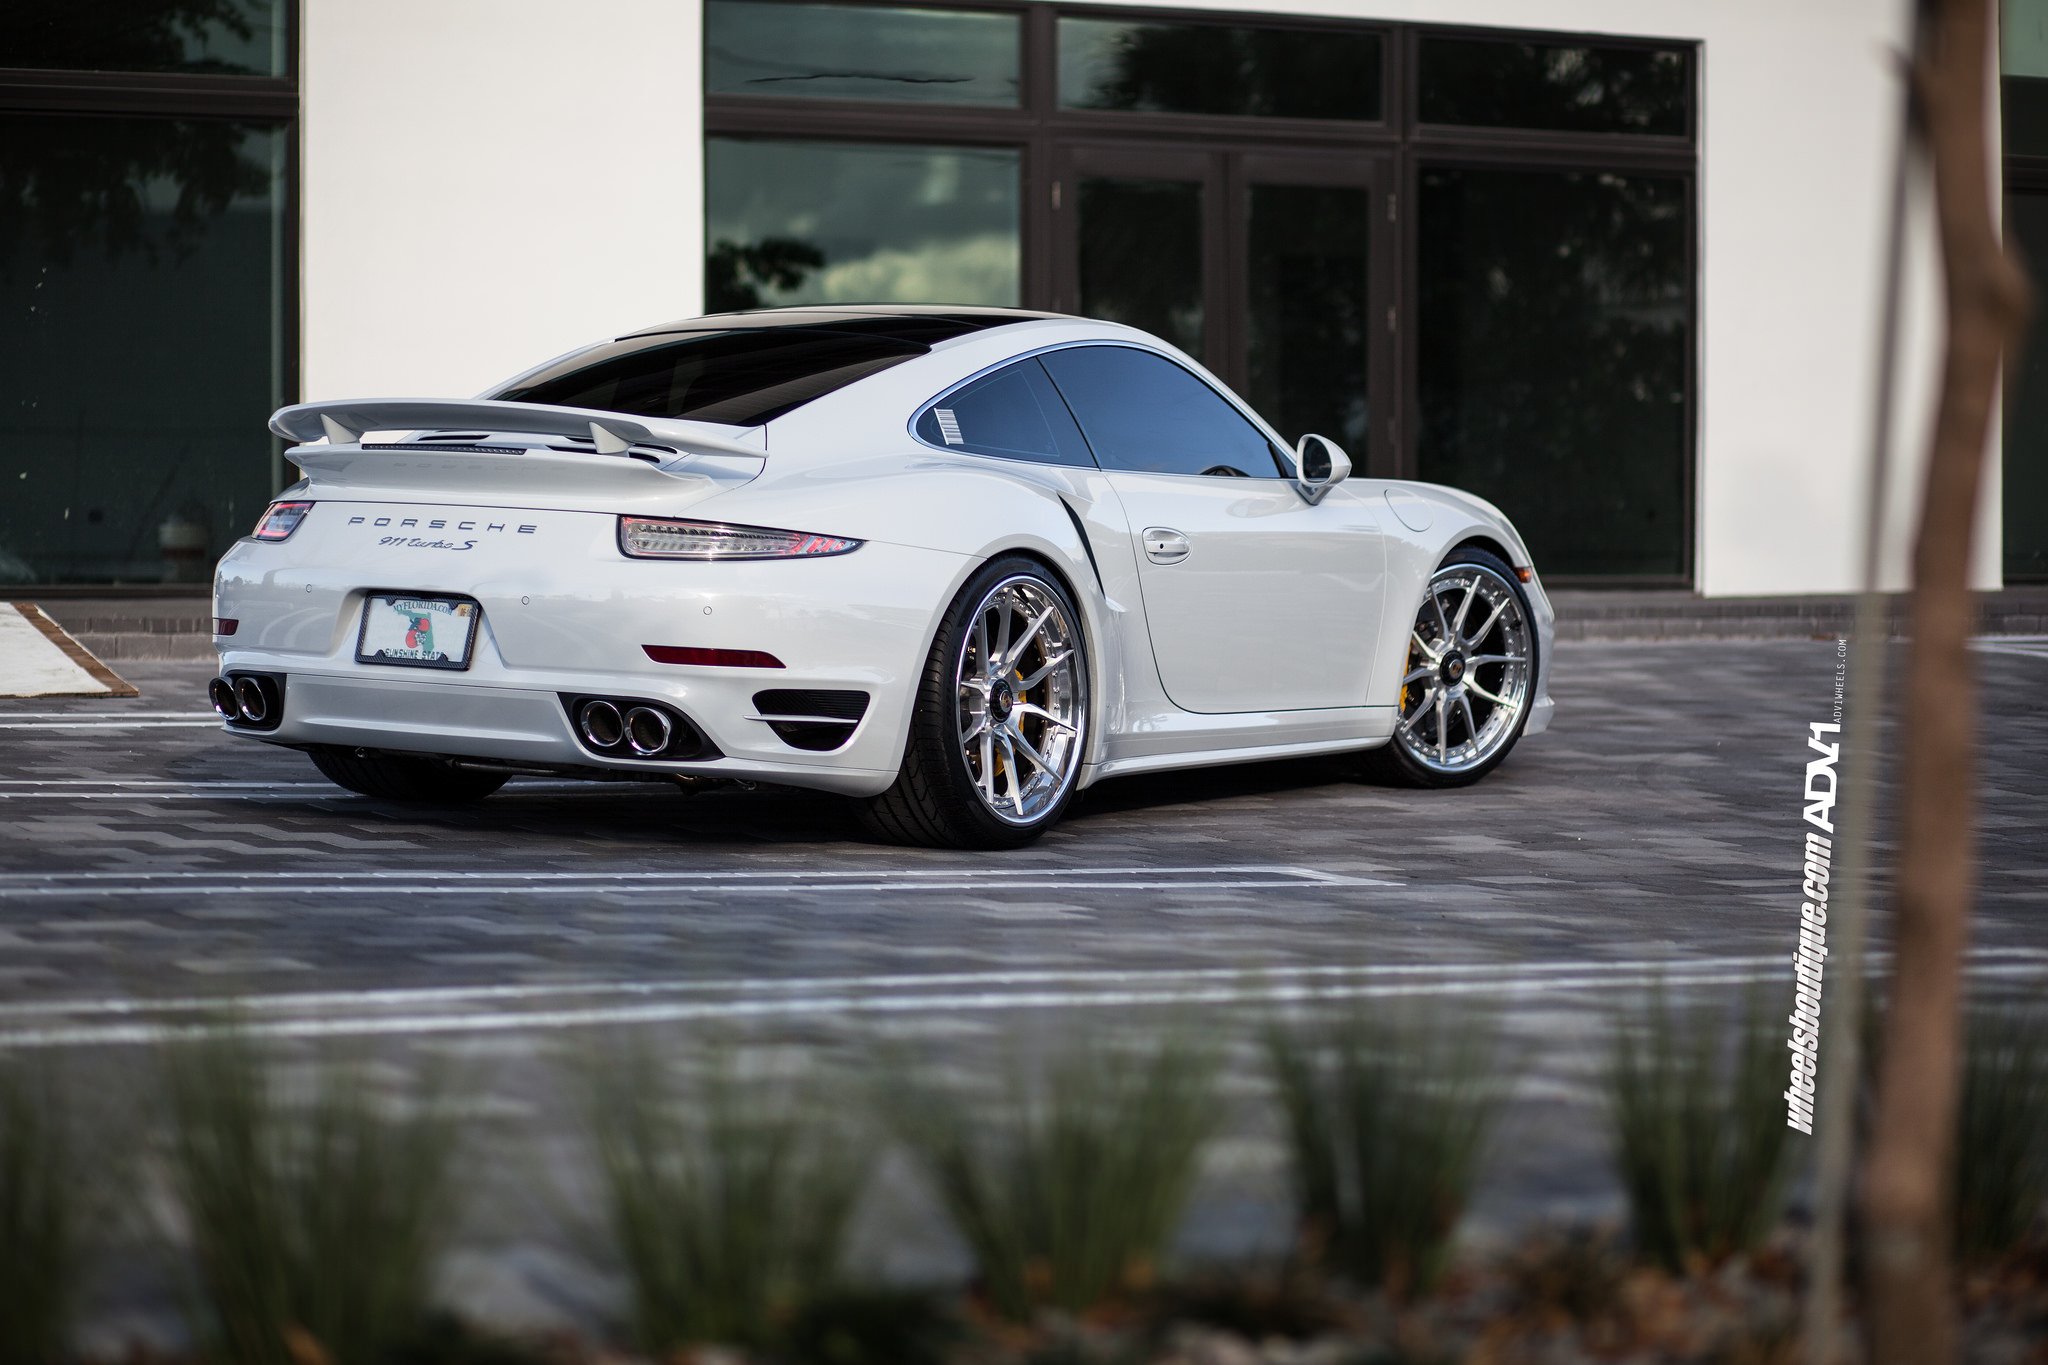 adv, And, Wheels, Gallery, Porsche, 991, Turbo s, Cars, Tuning, White Wallpaper